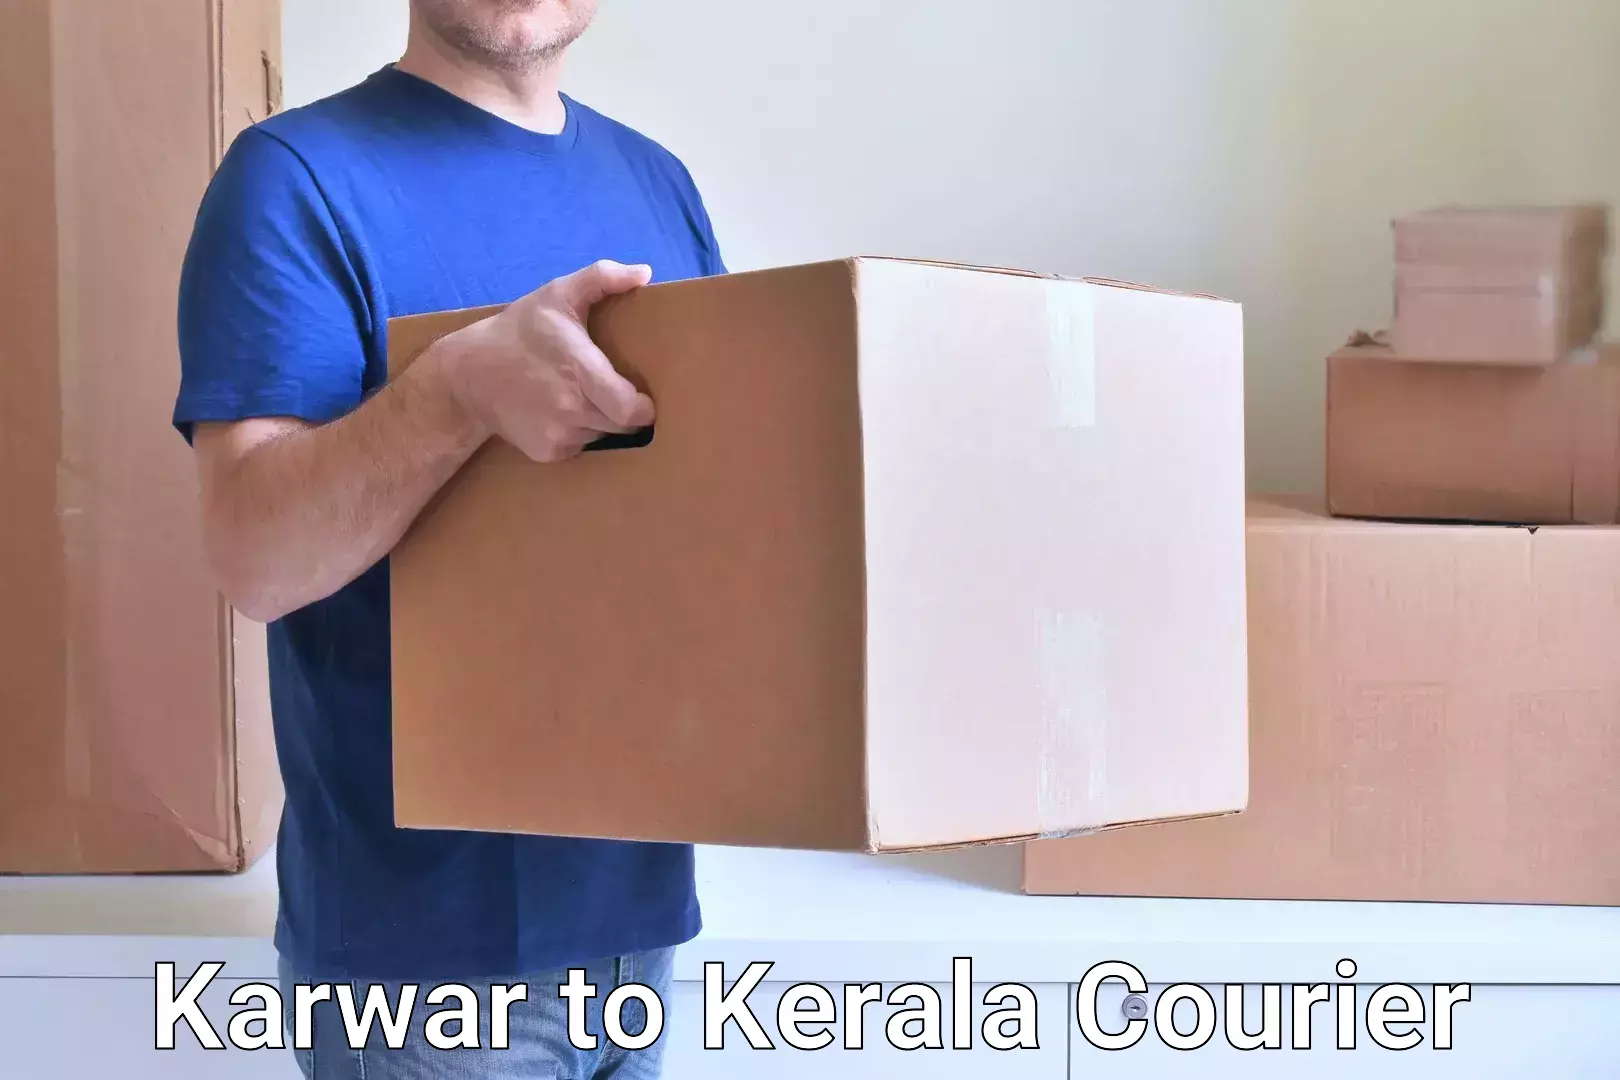 End-to-end delivery Karwar to Thalassery